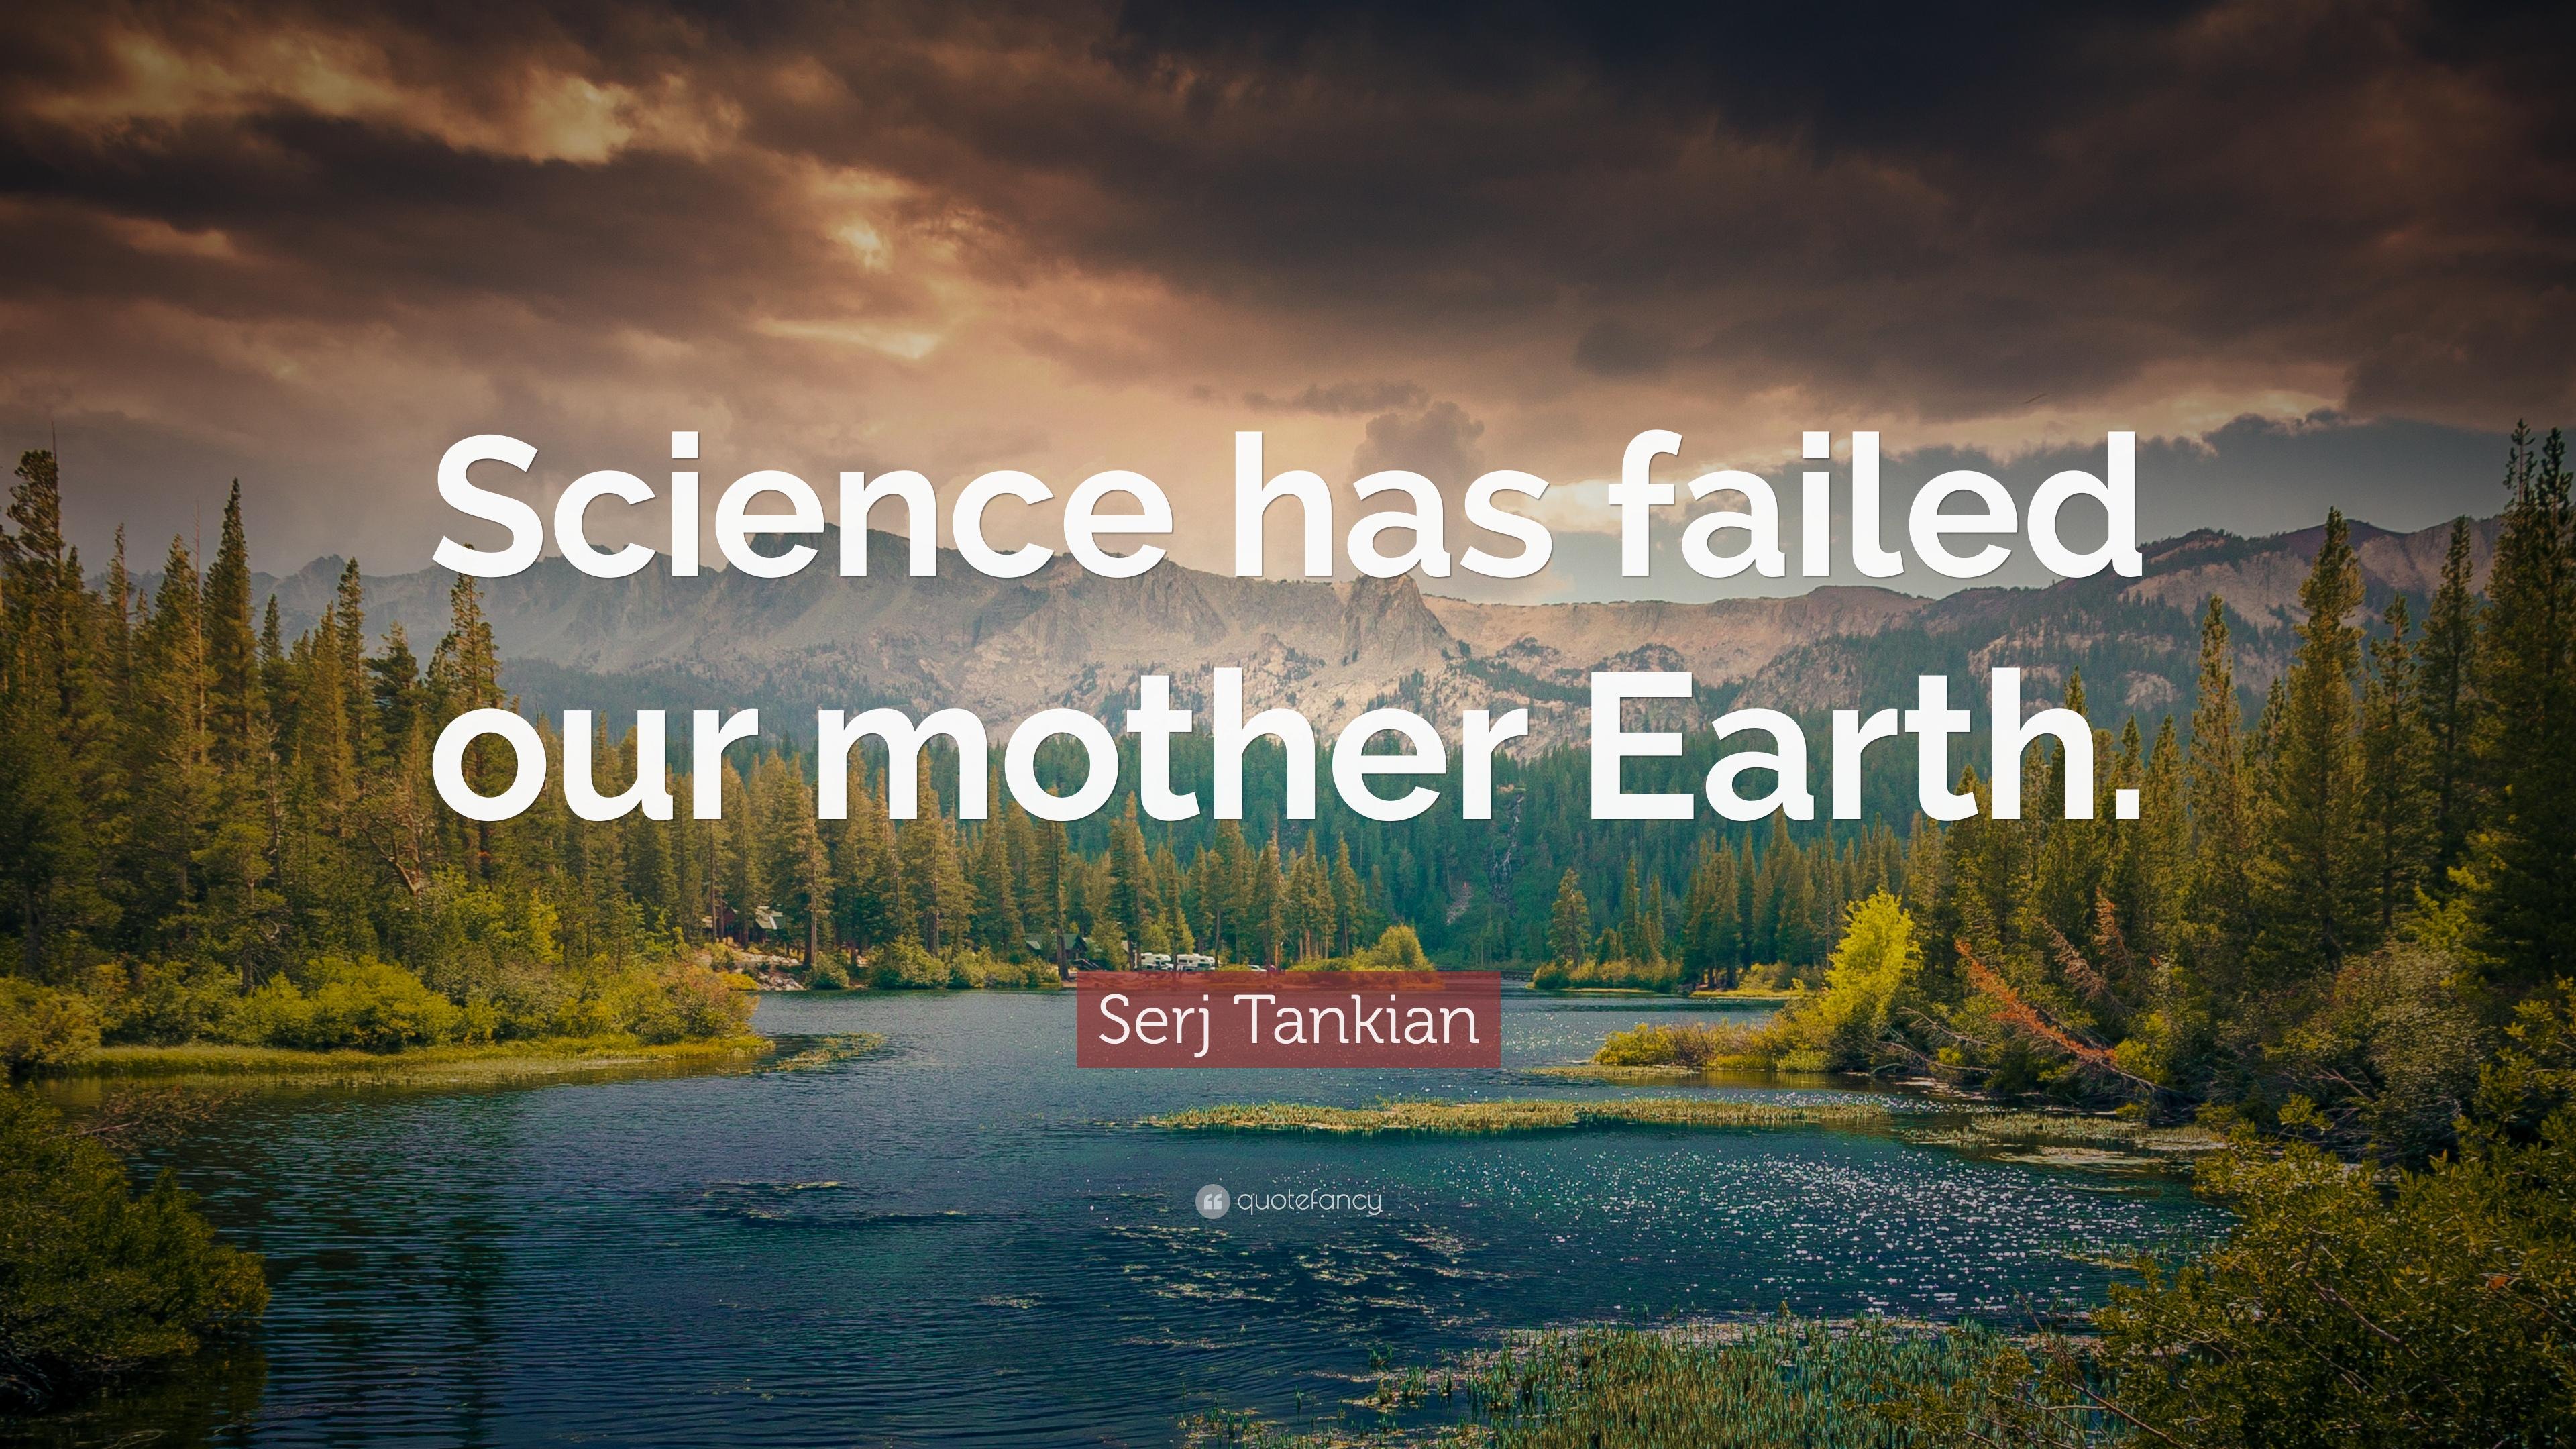 Serj Tankian Quote: “Science has failed our mother Earth